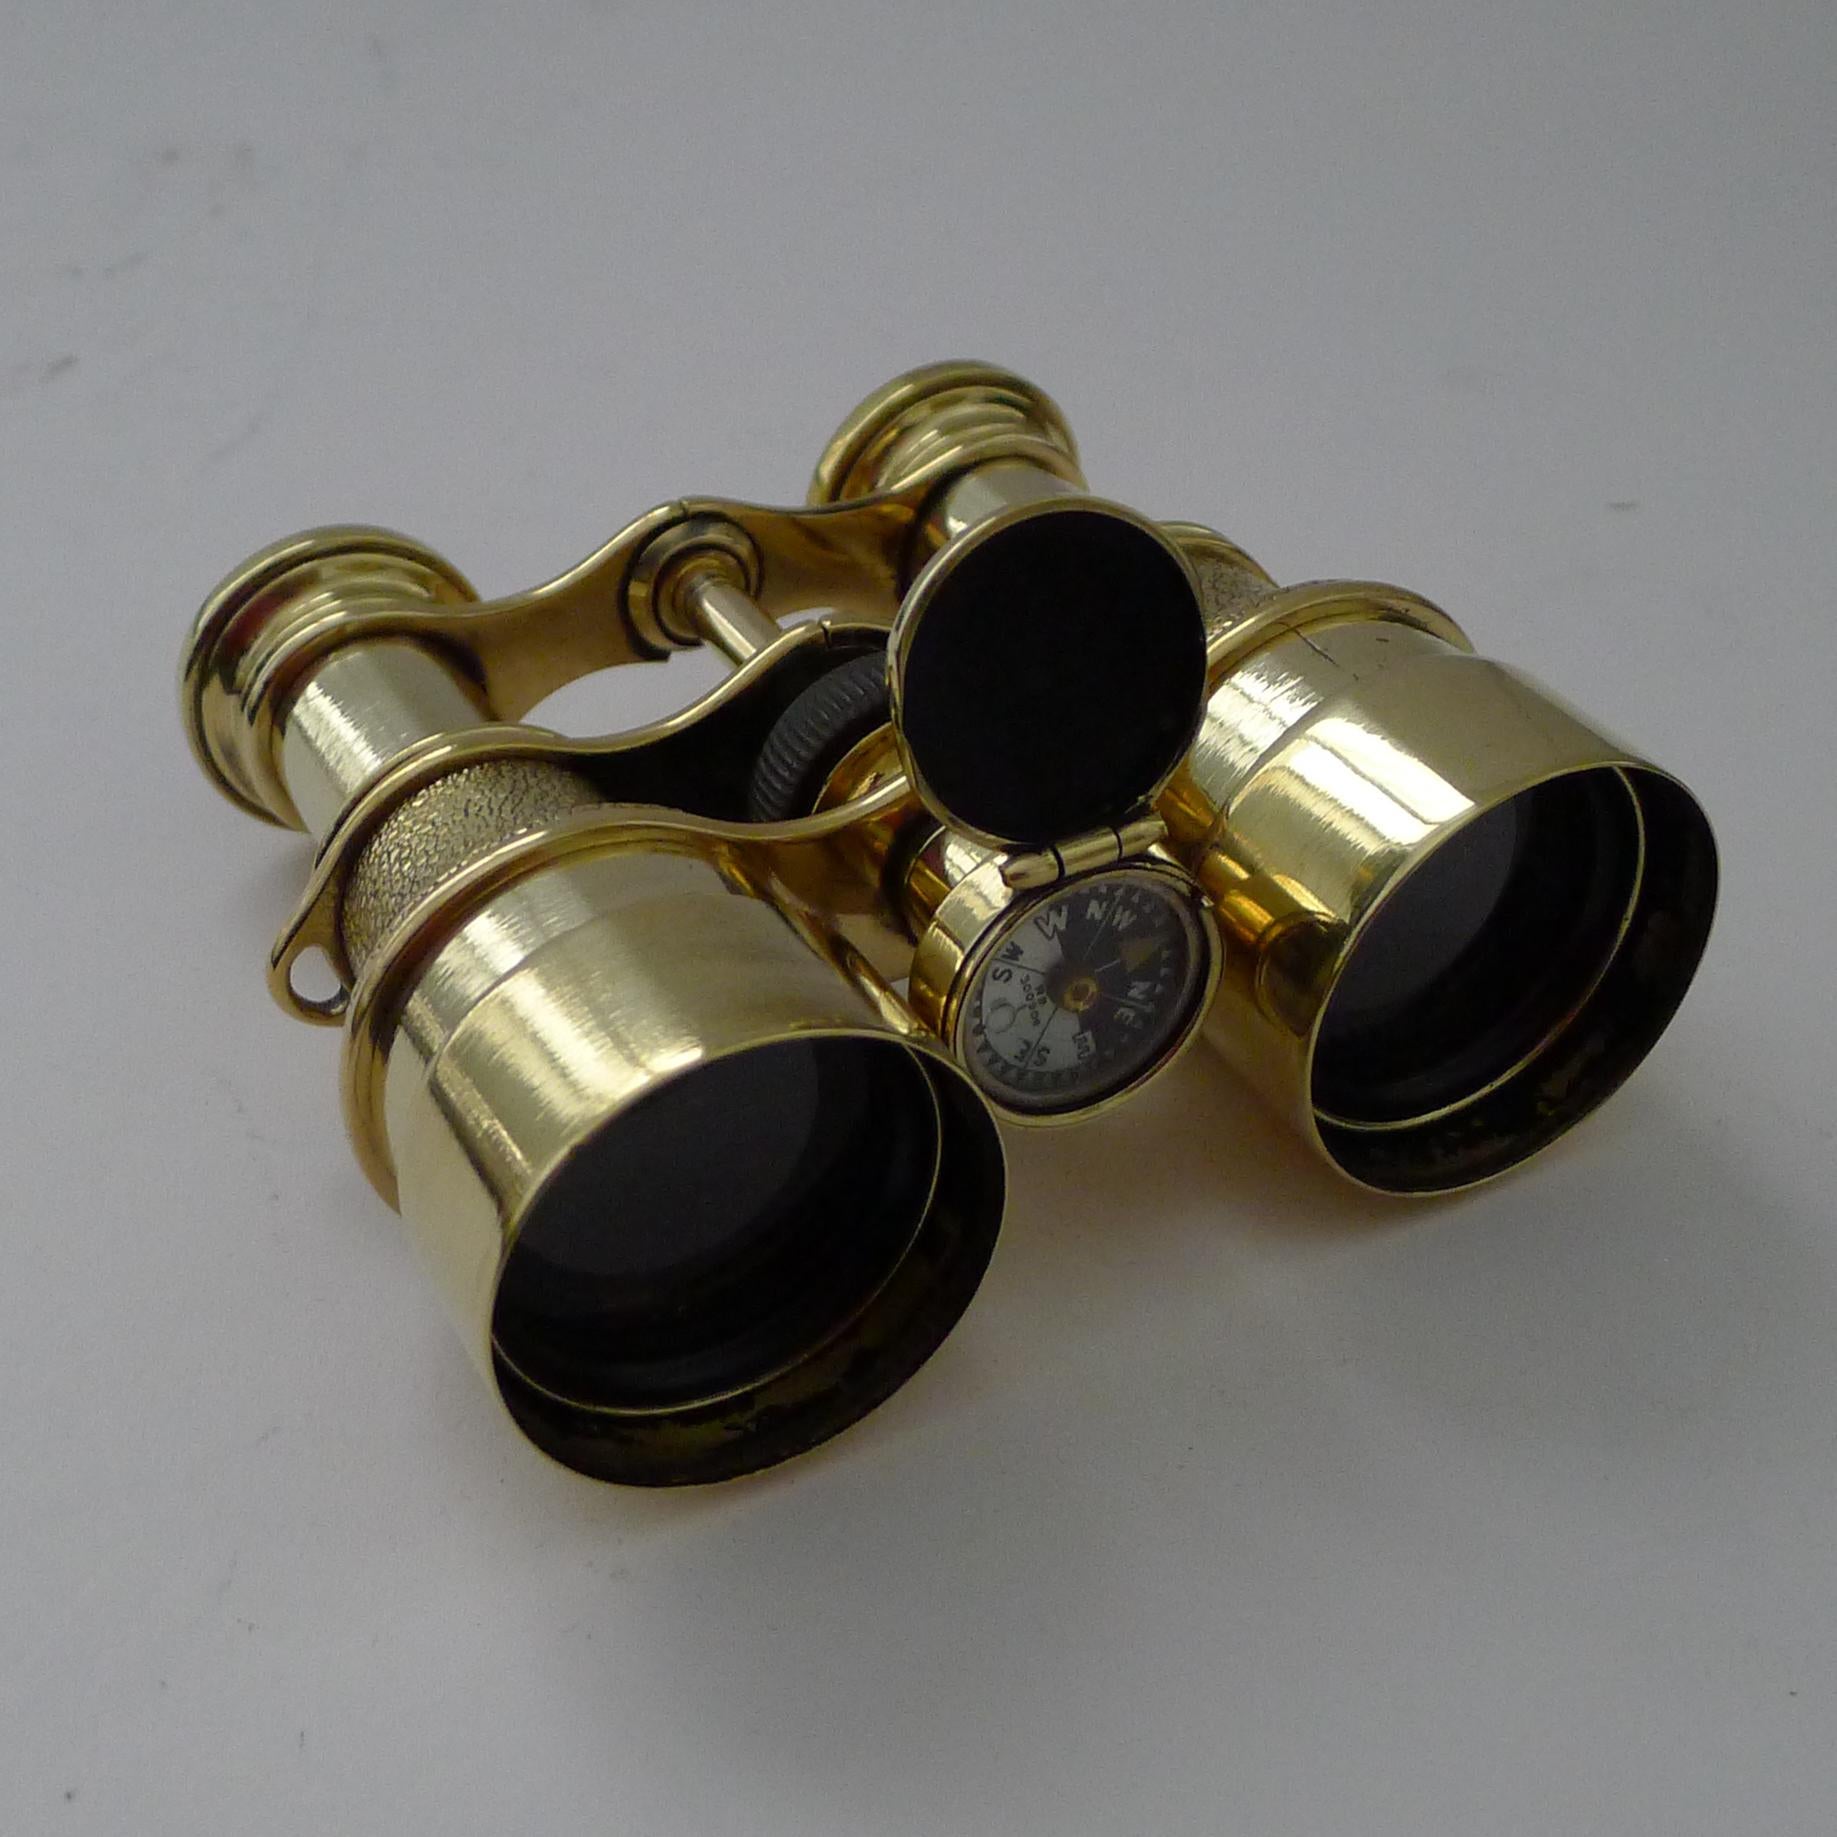 British Antique English Field Glasses / Binoculars by Lawrence and Mayo - With Compass For Sale